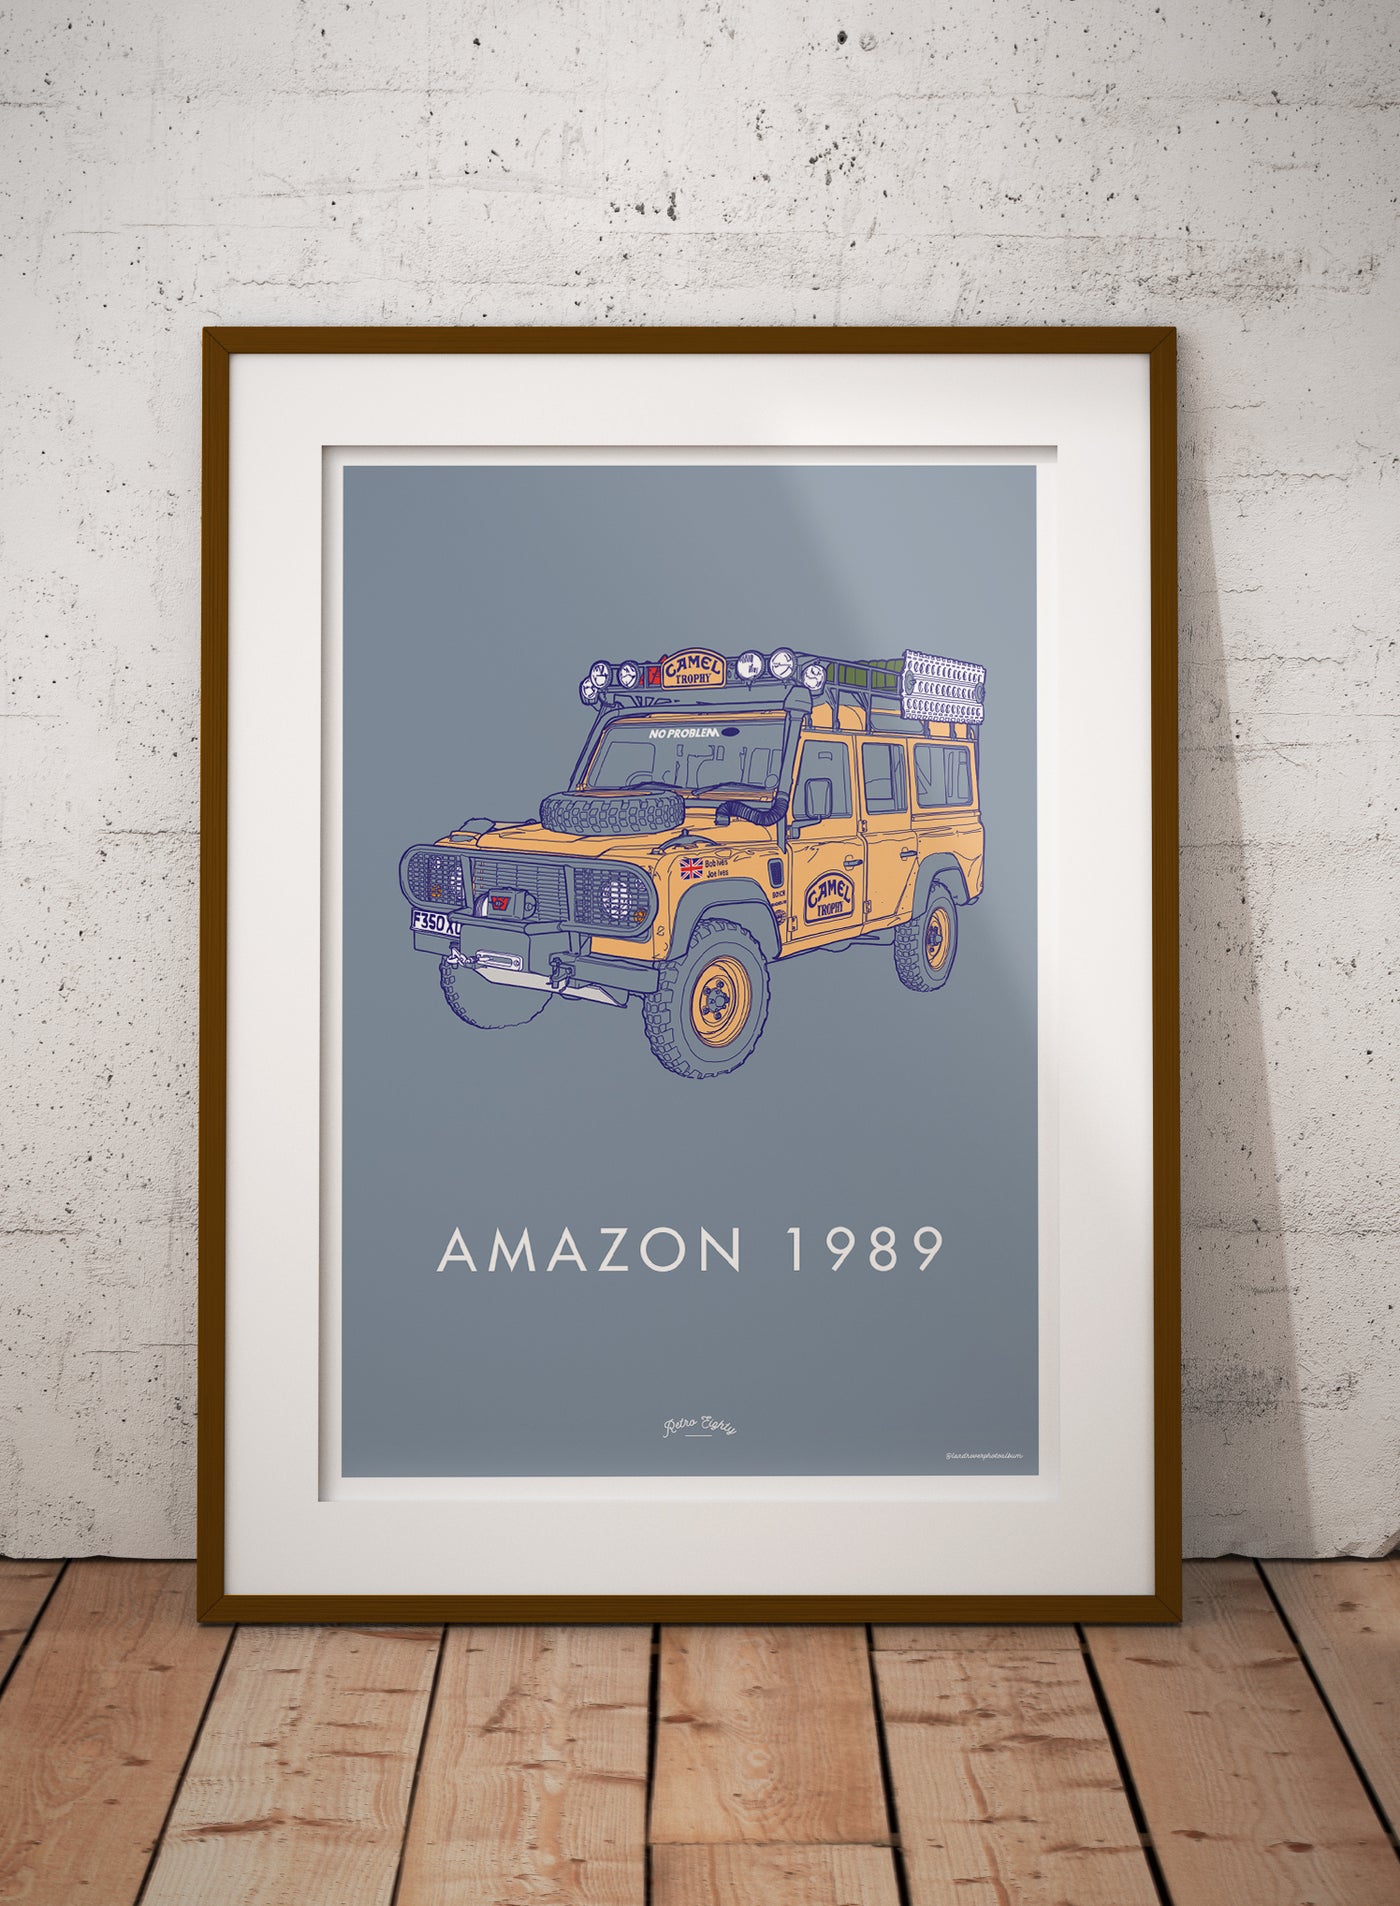 Amazon 1989 Camel Trophy Land Rover poster print